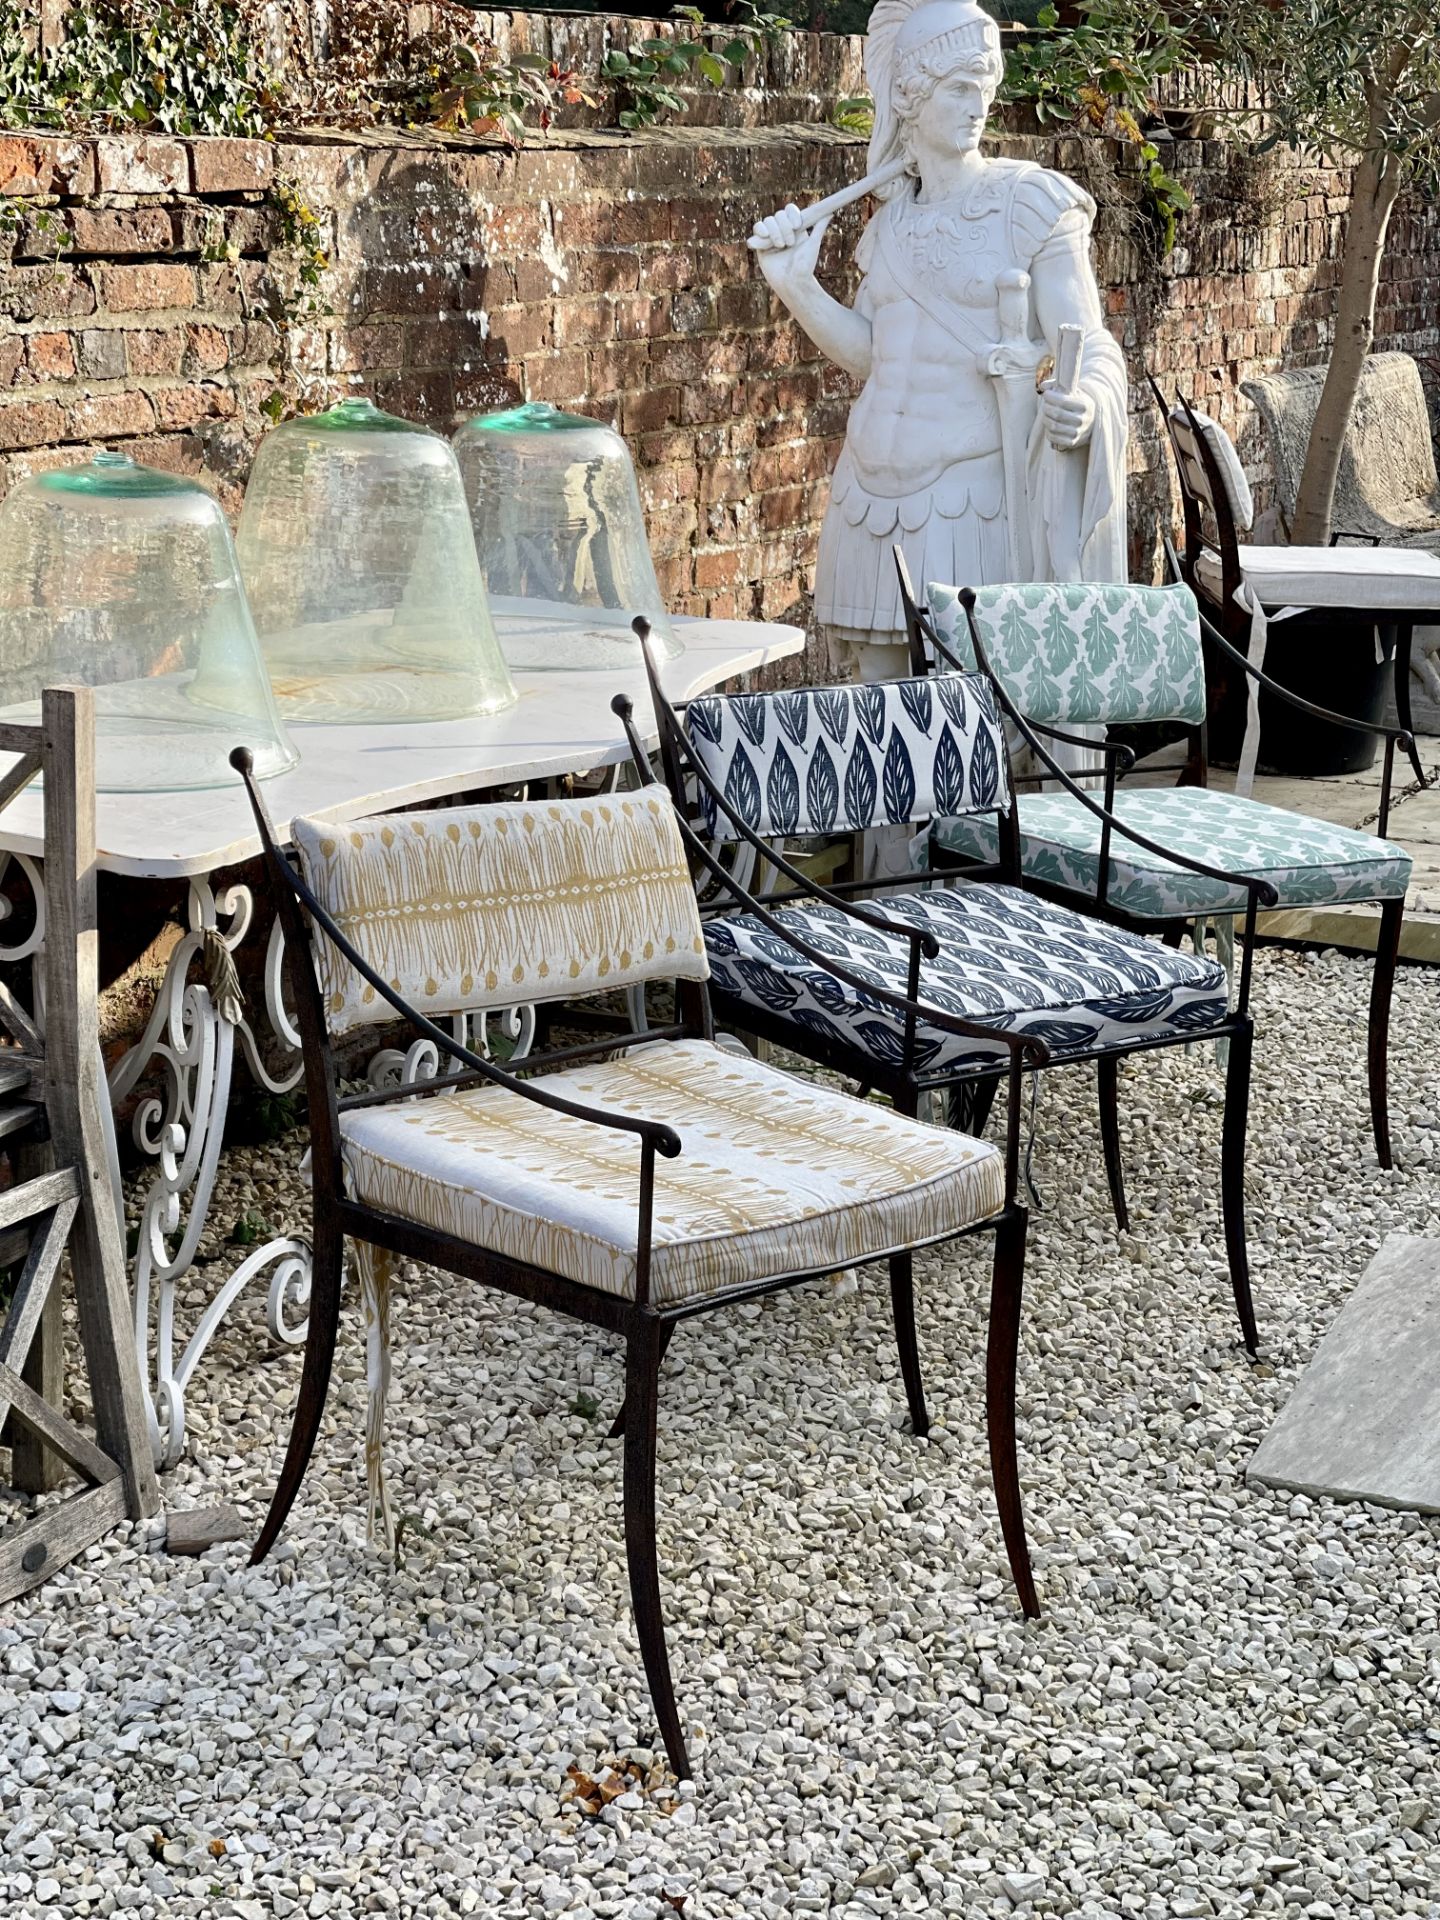 A SET OF FOUR IRON GARDEN CHAIRS WITH CUSHIONS - Image 6 of 6